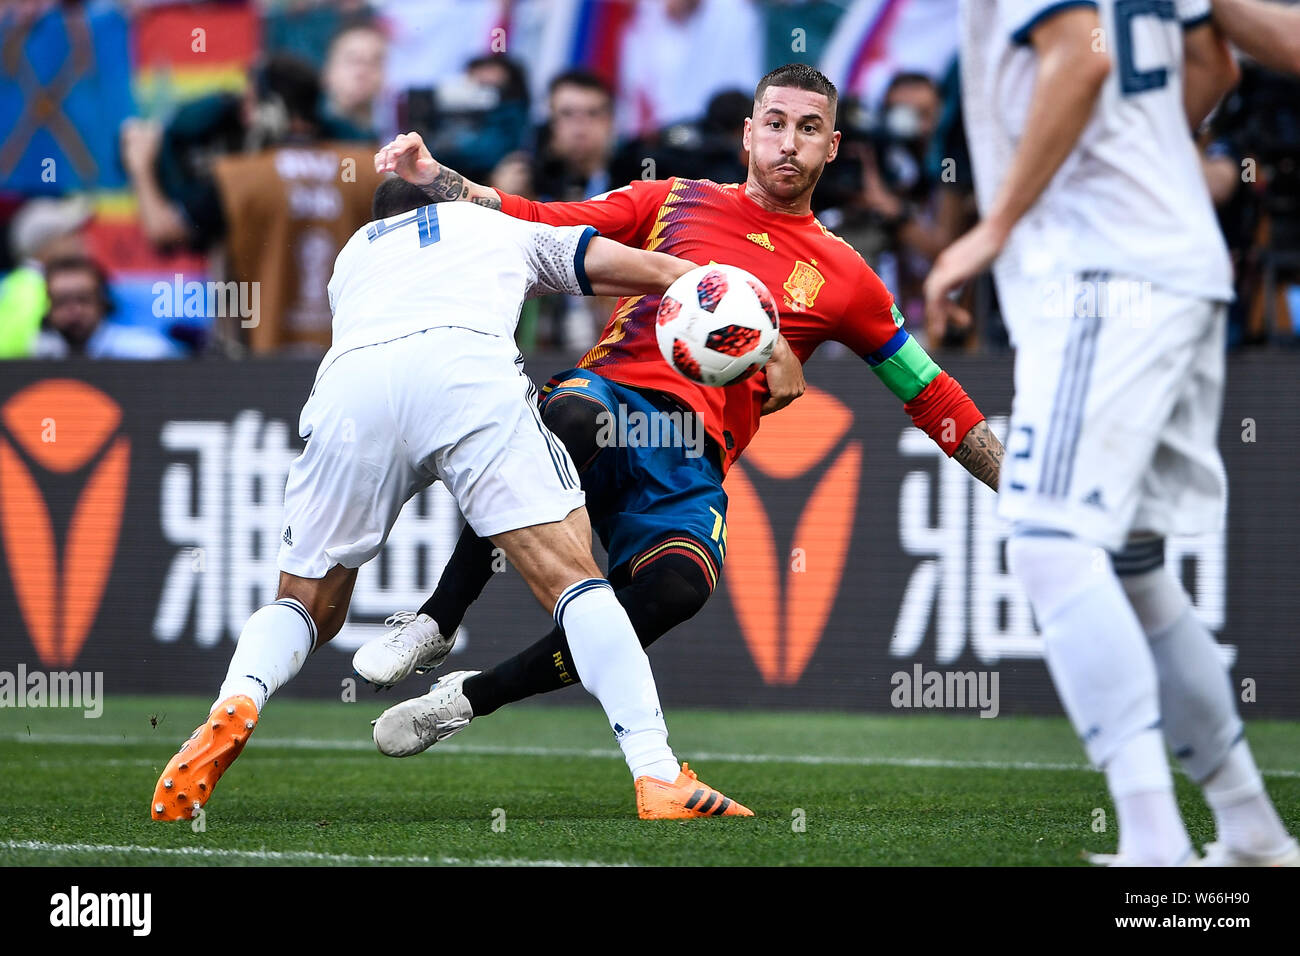 Sergei Ignashevich of Russia, left, challenges Sergio Ramos of Spain in their Round of 16 match during the 2018 FIFA World Cup in Moscow, Russia, 1 Ju Stock Photo